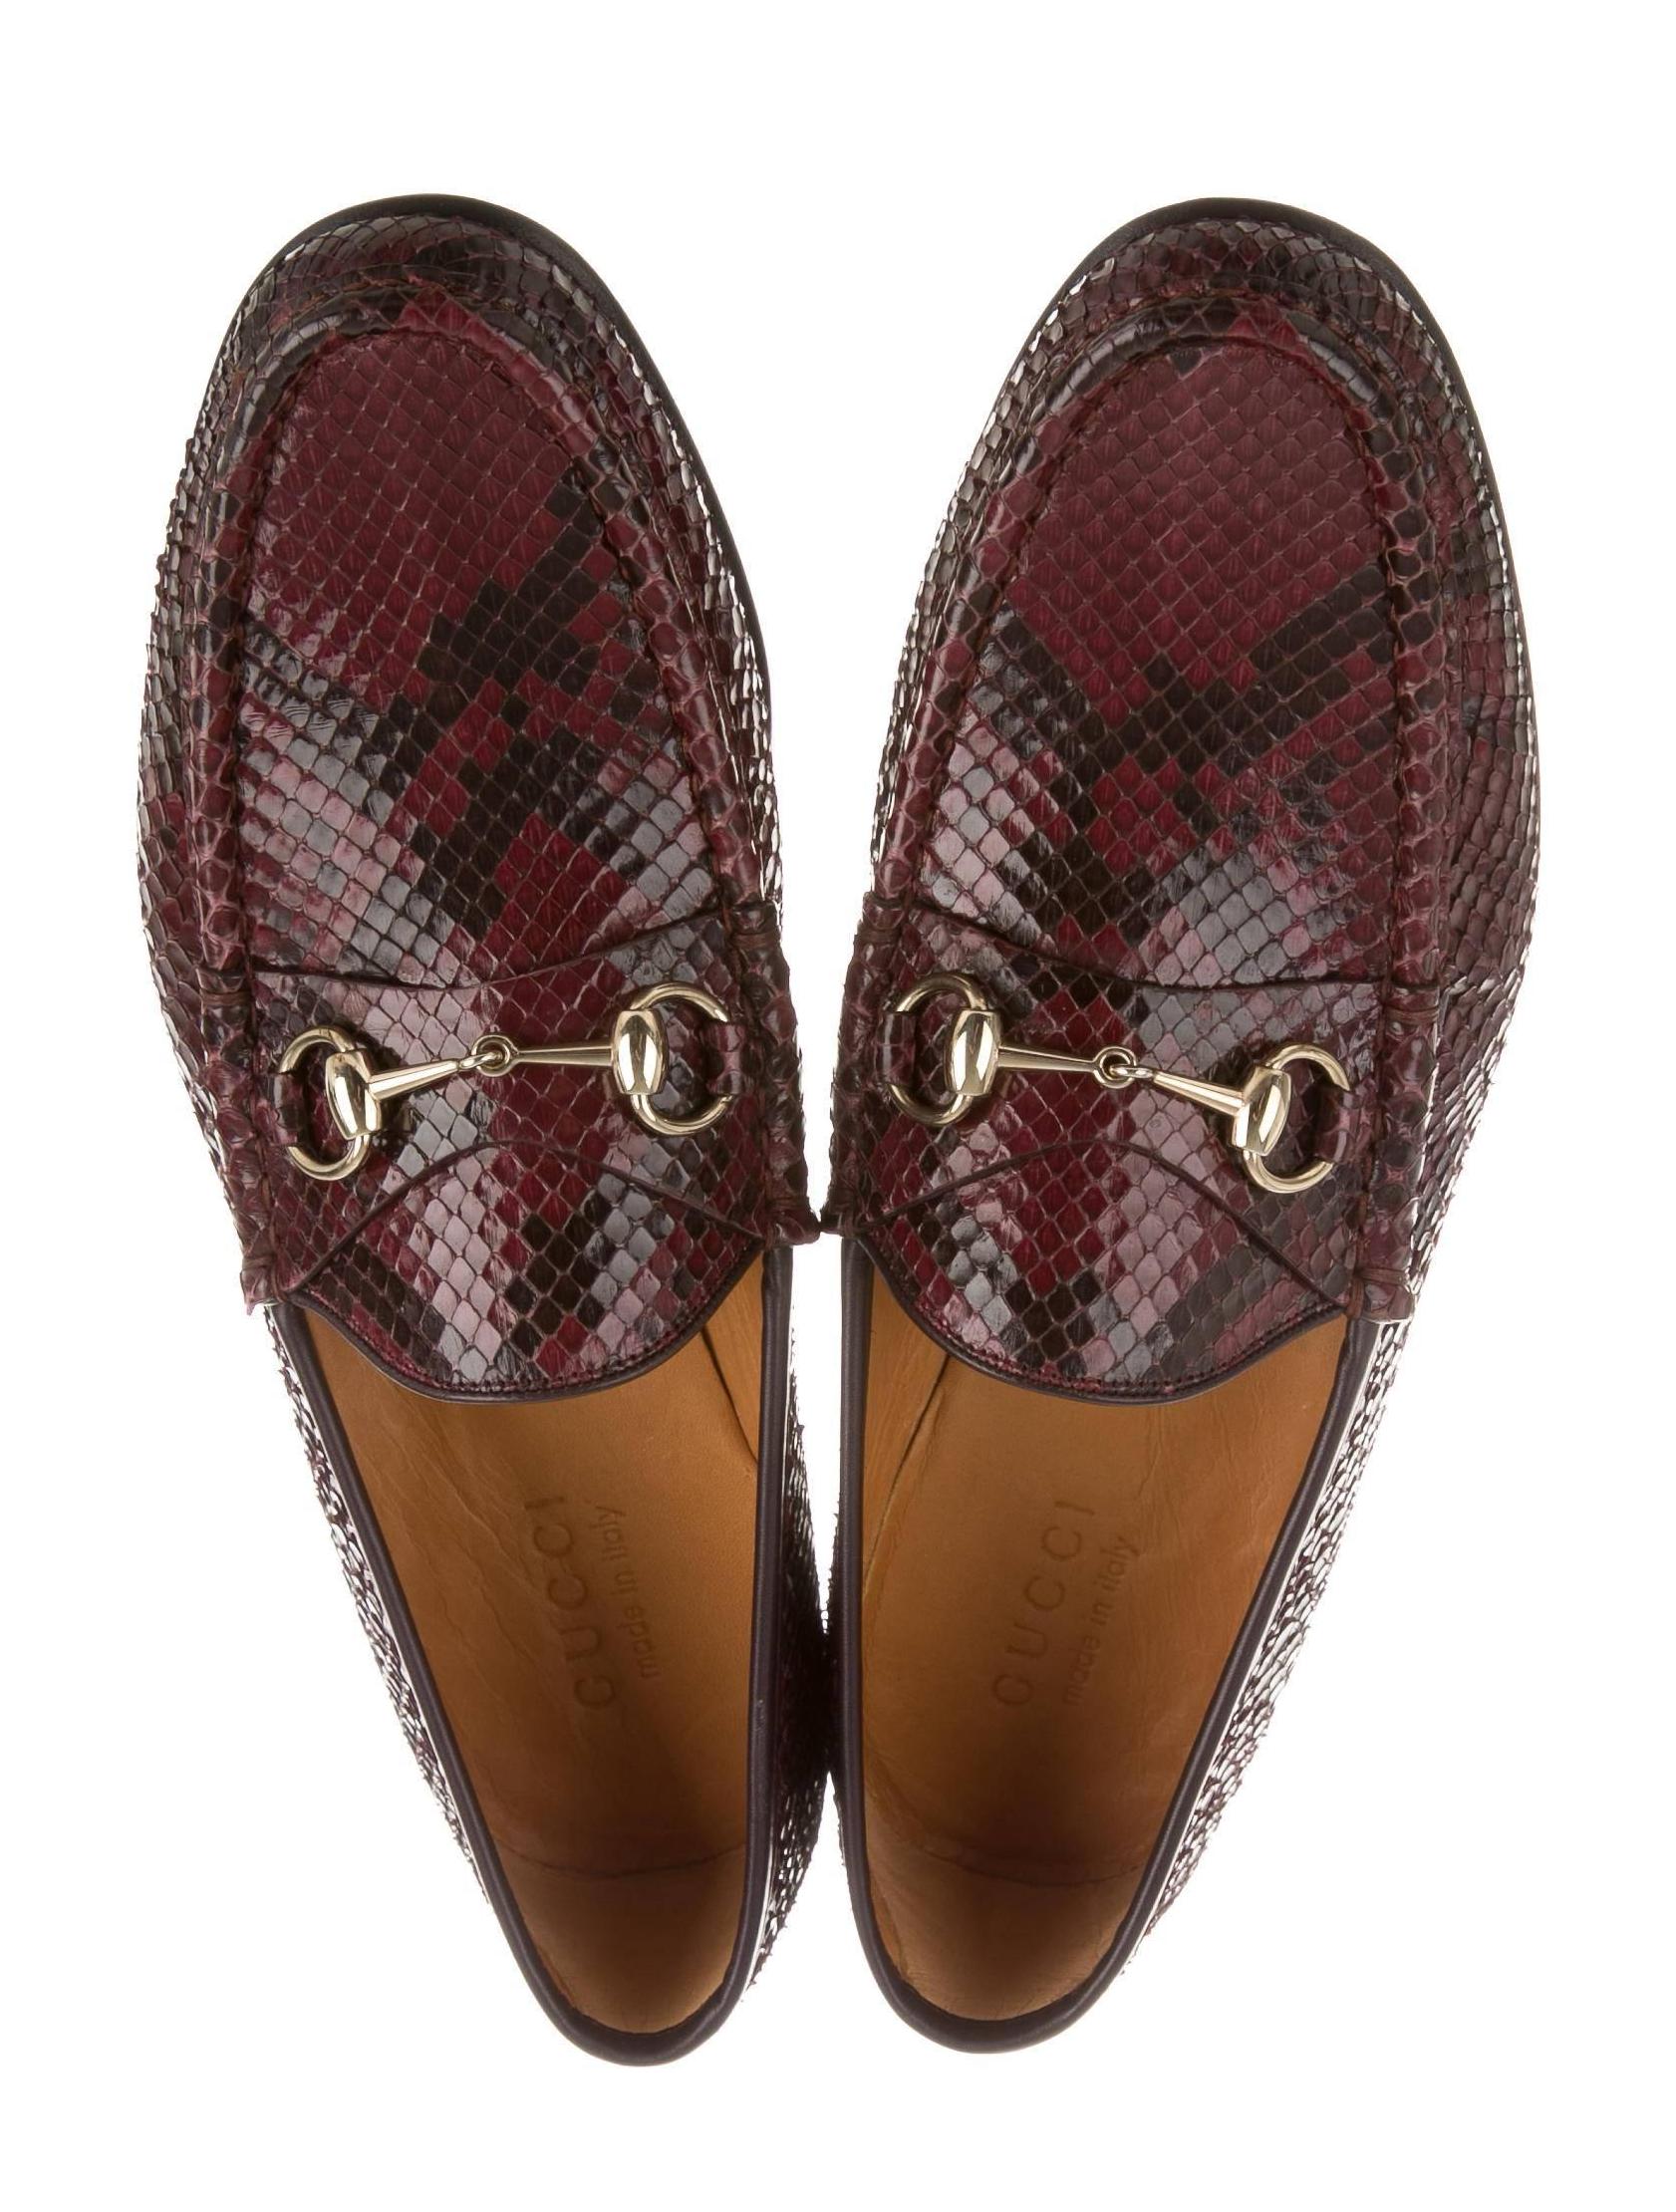 CURATOR'S NOTES

Size listed 9 1/2 D 
Python snakeskin leather
Gold tone hardware
Made in Italy
Heel height 1